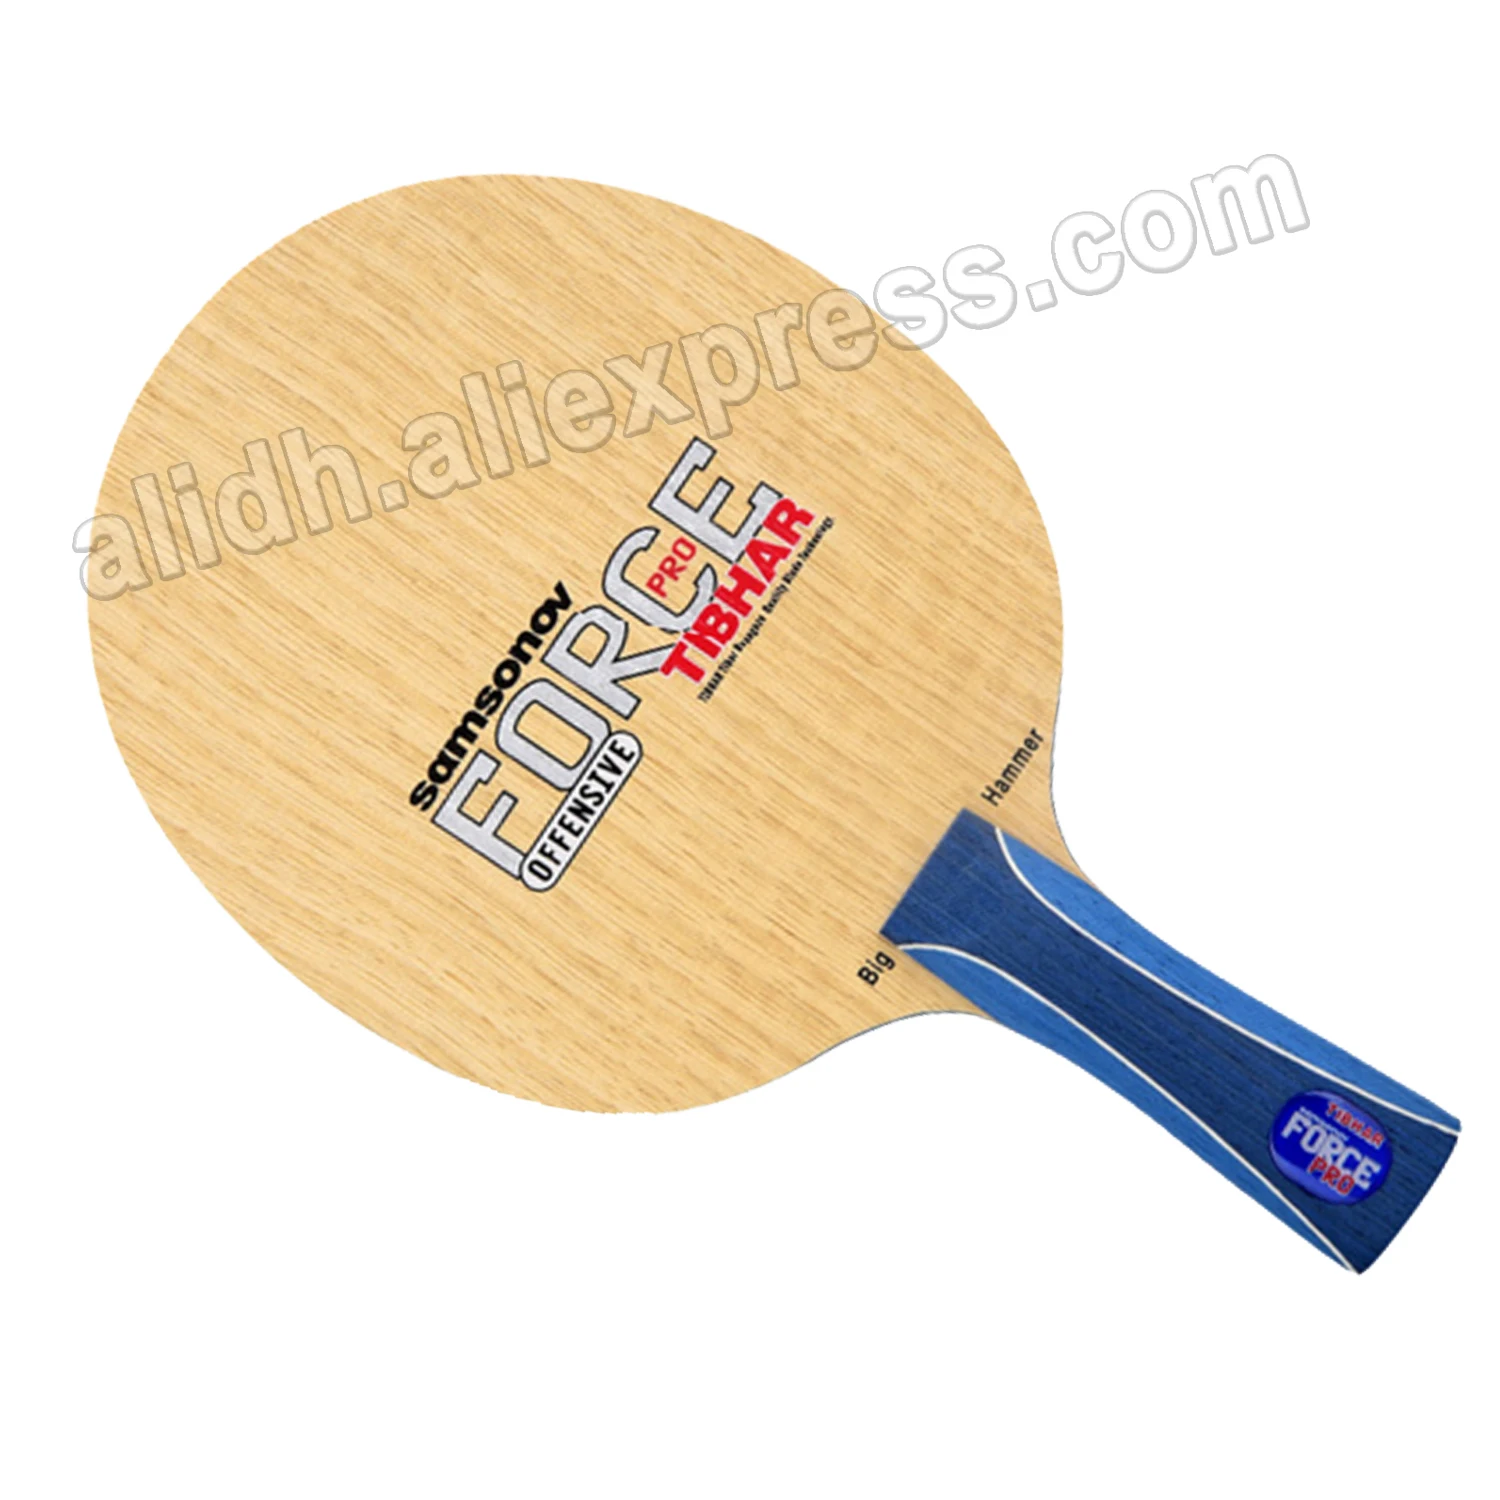 Original Tibhar SAMSONOV FORCE PRO table tennis blade table tennis rackets racquet sports fast attack with loop pure wood